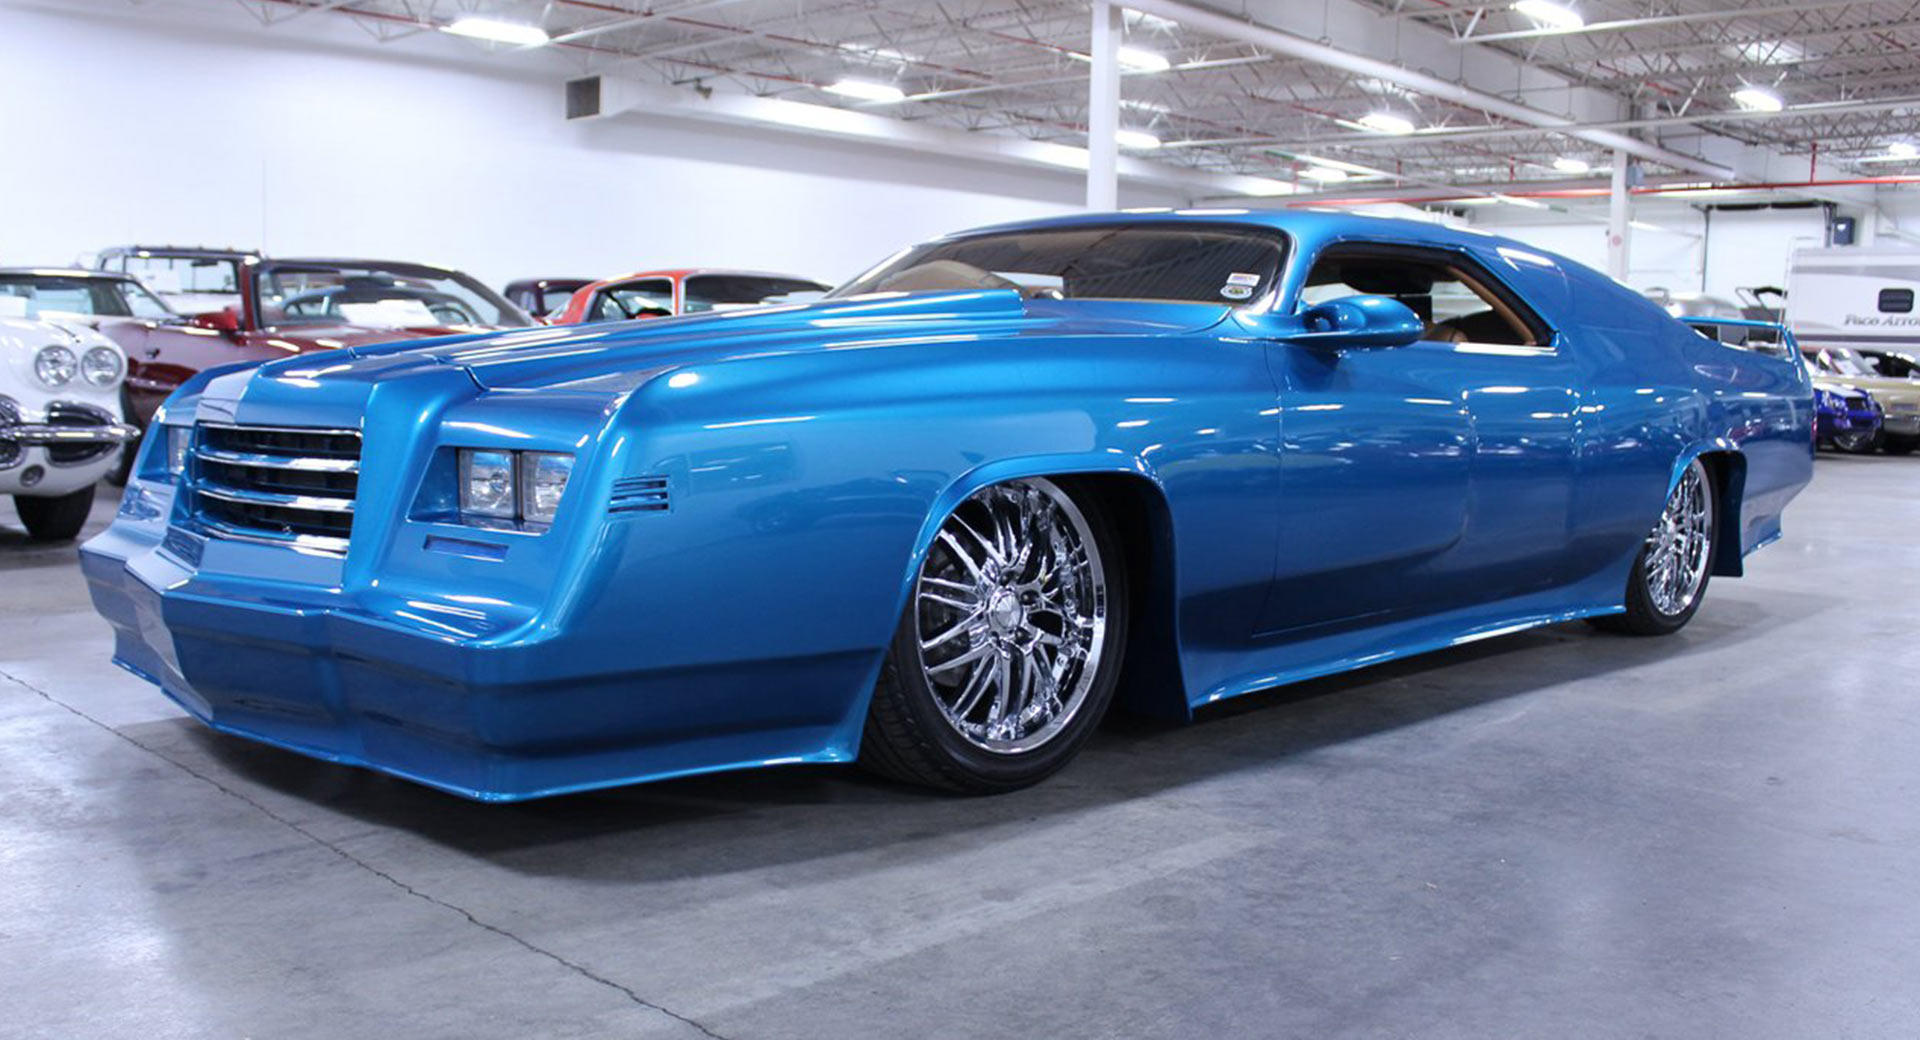 A Dodge Magnum Like No Other You've Seen Has $300,000 Worth Of Mods